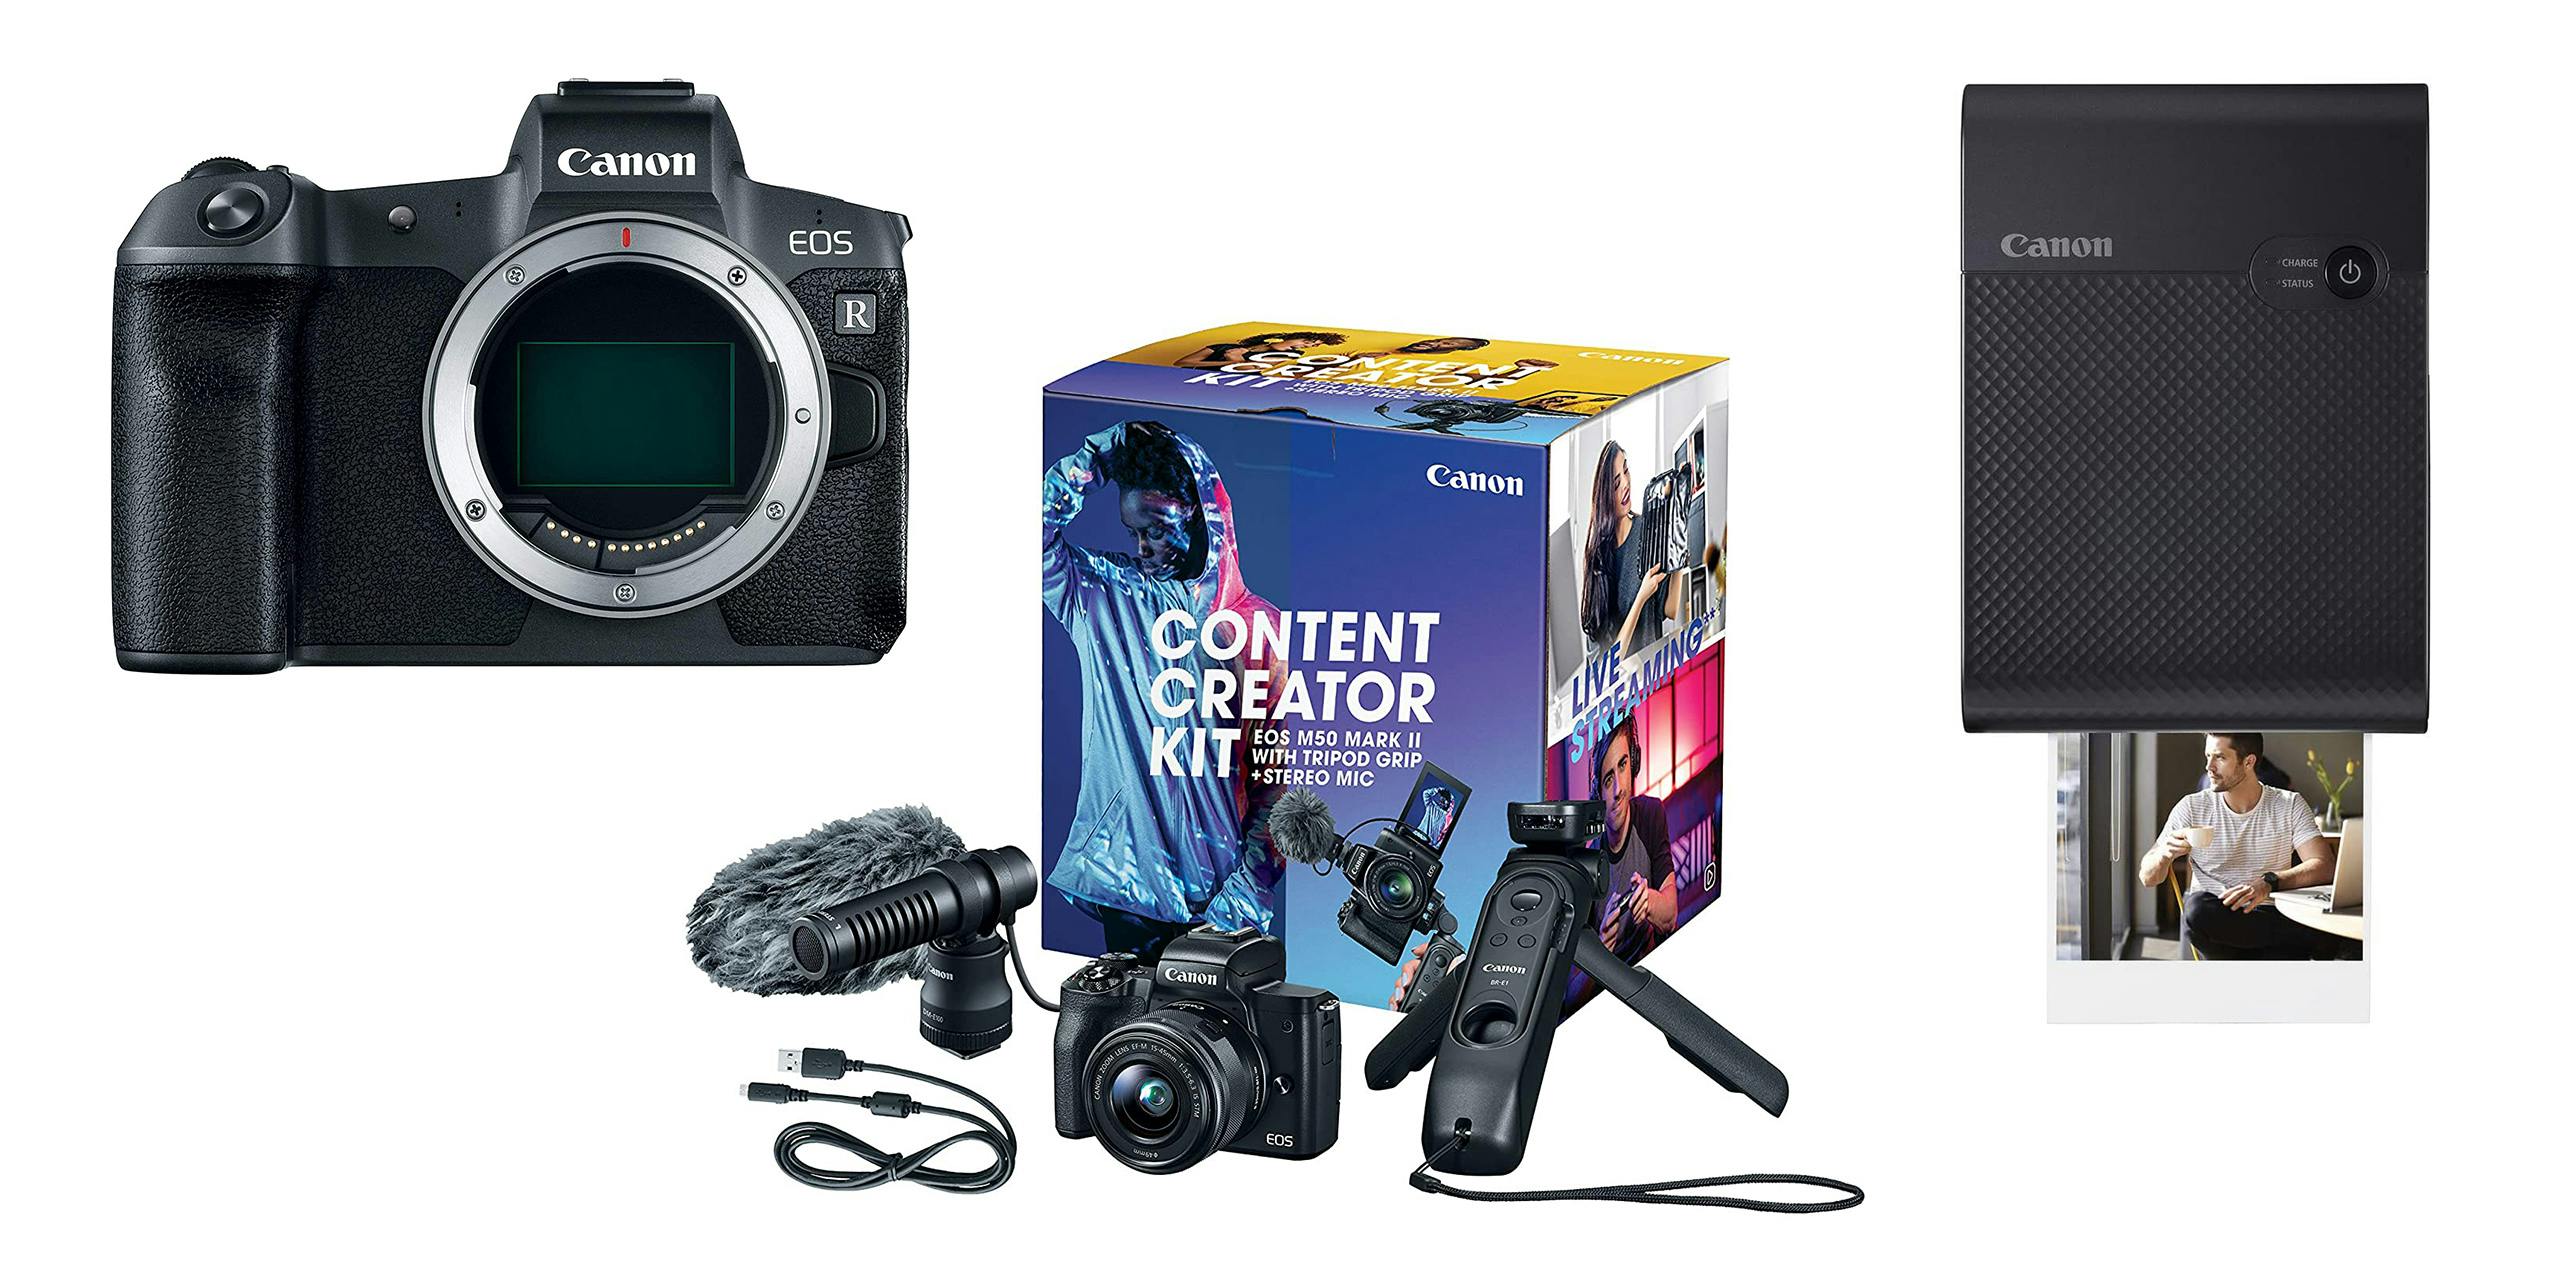 A collection of popular Canon products including EOS camera and Content Creator Kit.